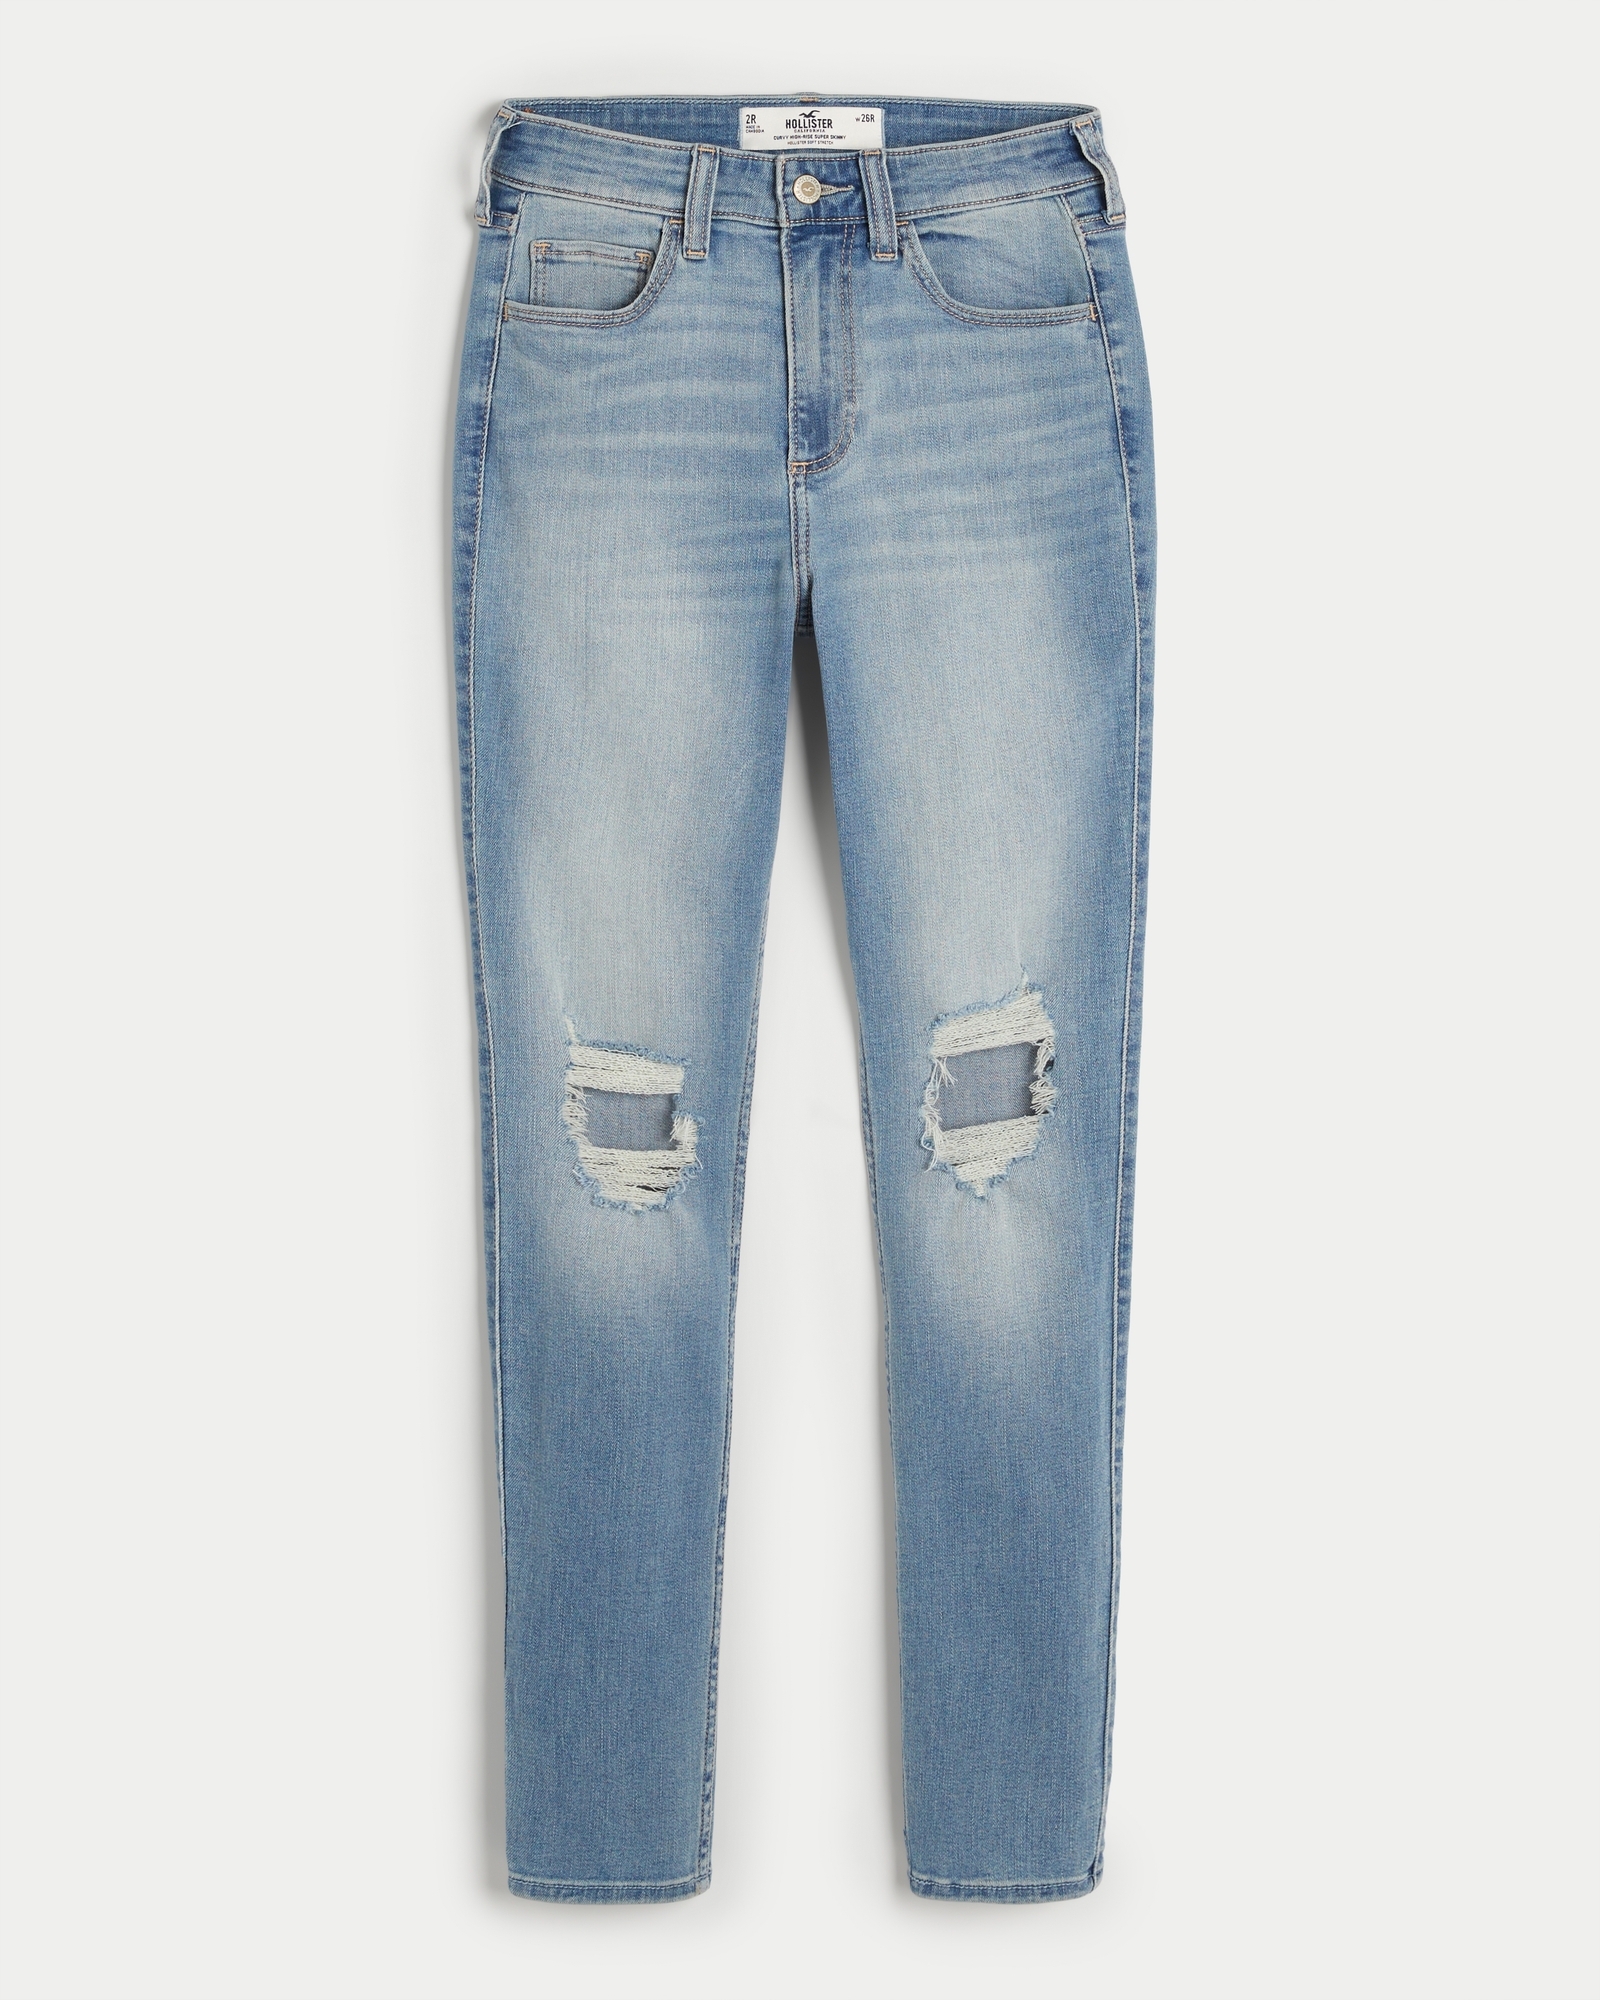 Hollister, Jeans, Hollister 3x26 High Rise Slim Straight Jeans